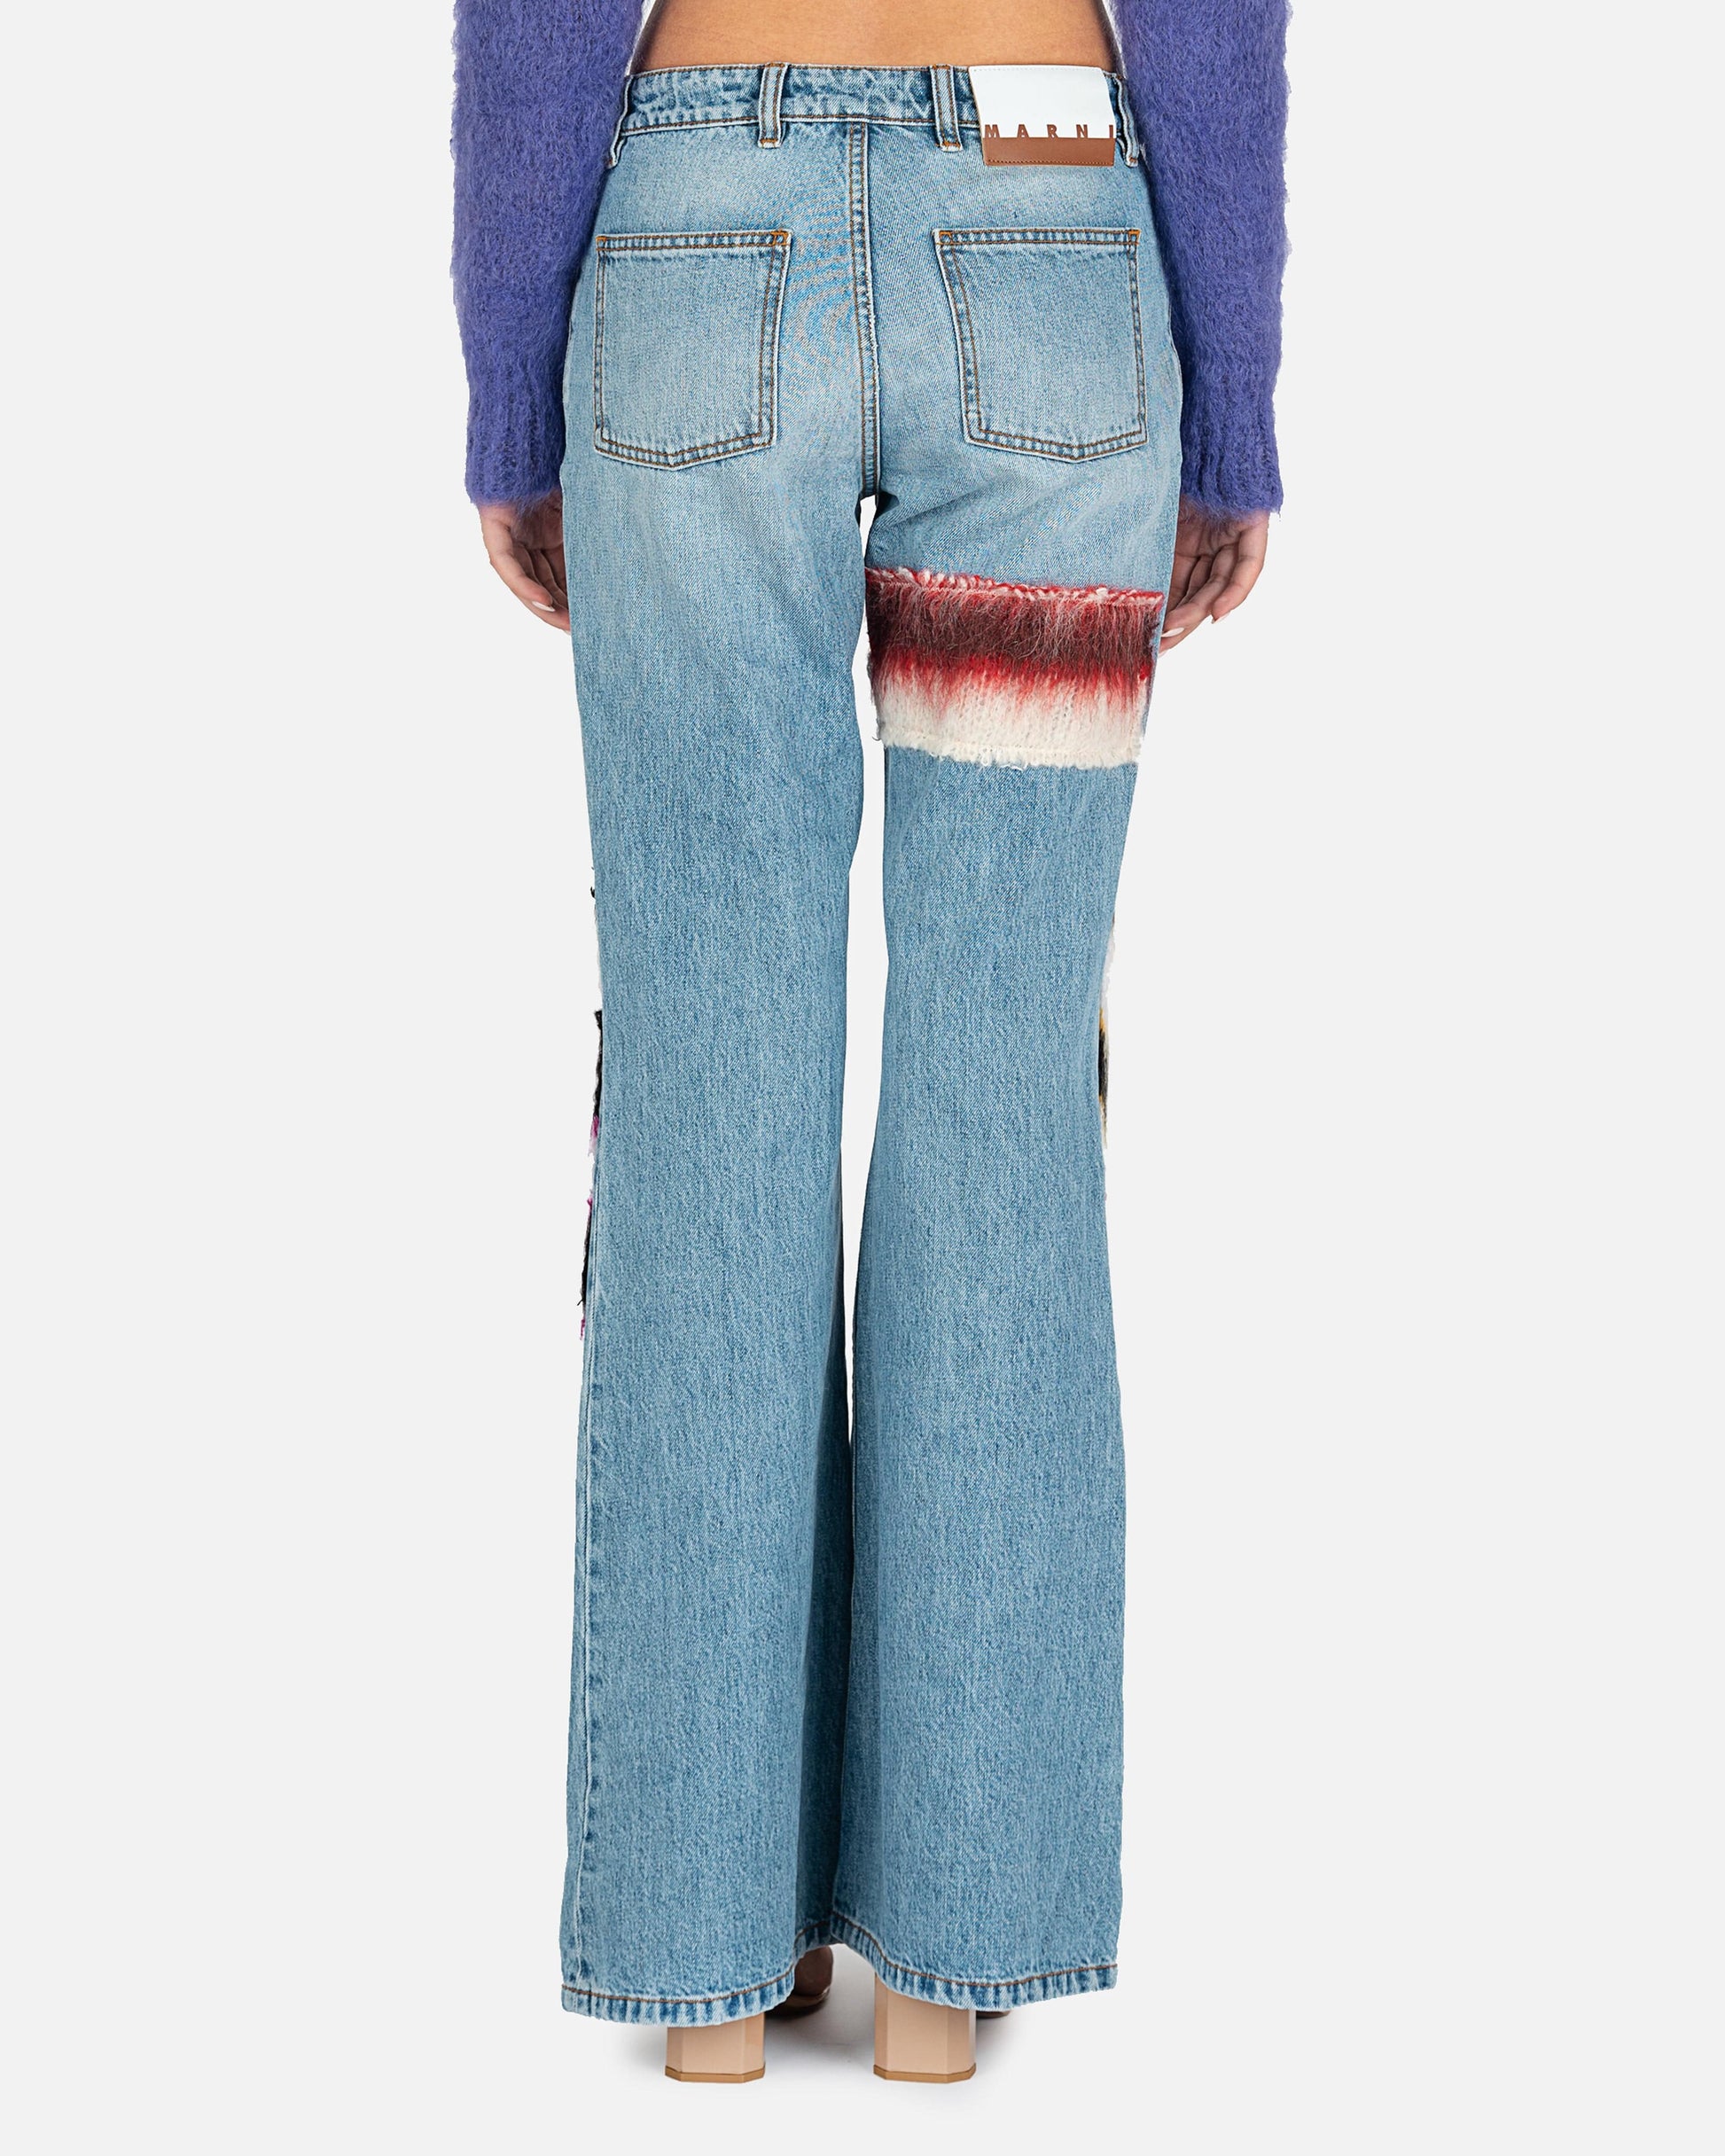 Marni Women Pants Embroidered Stripe Patch Relaxed Denim in Iris Blue